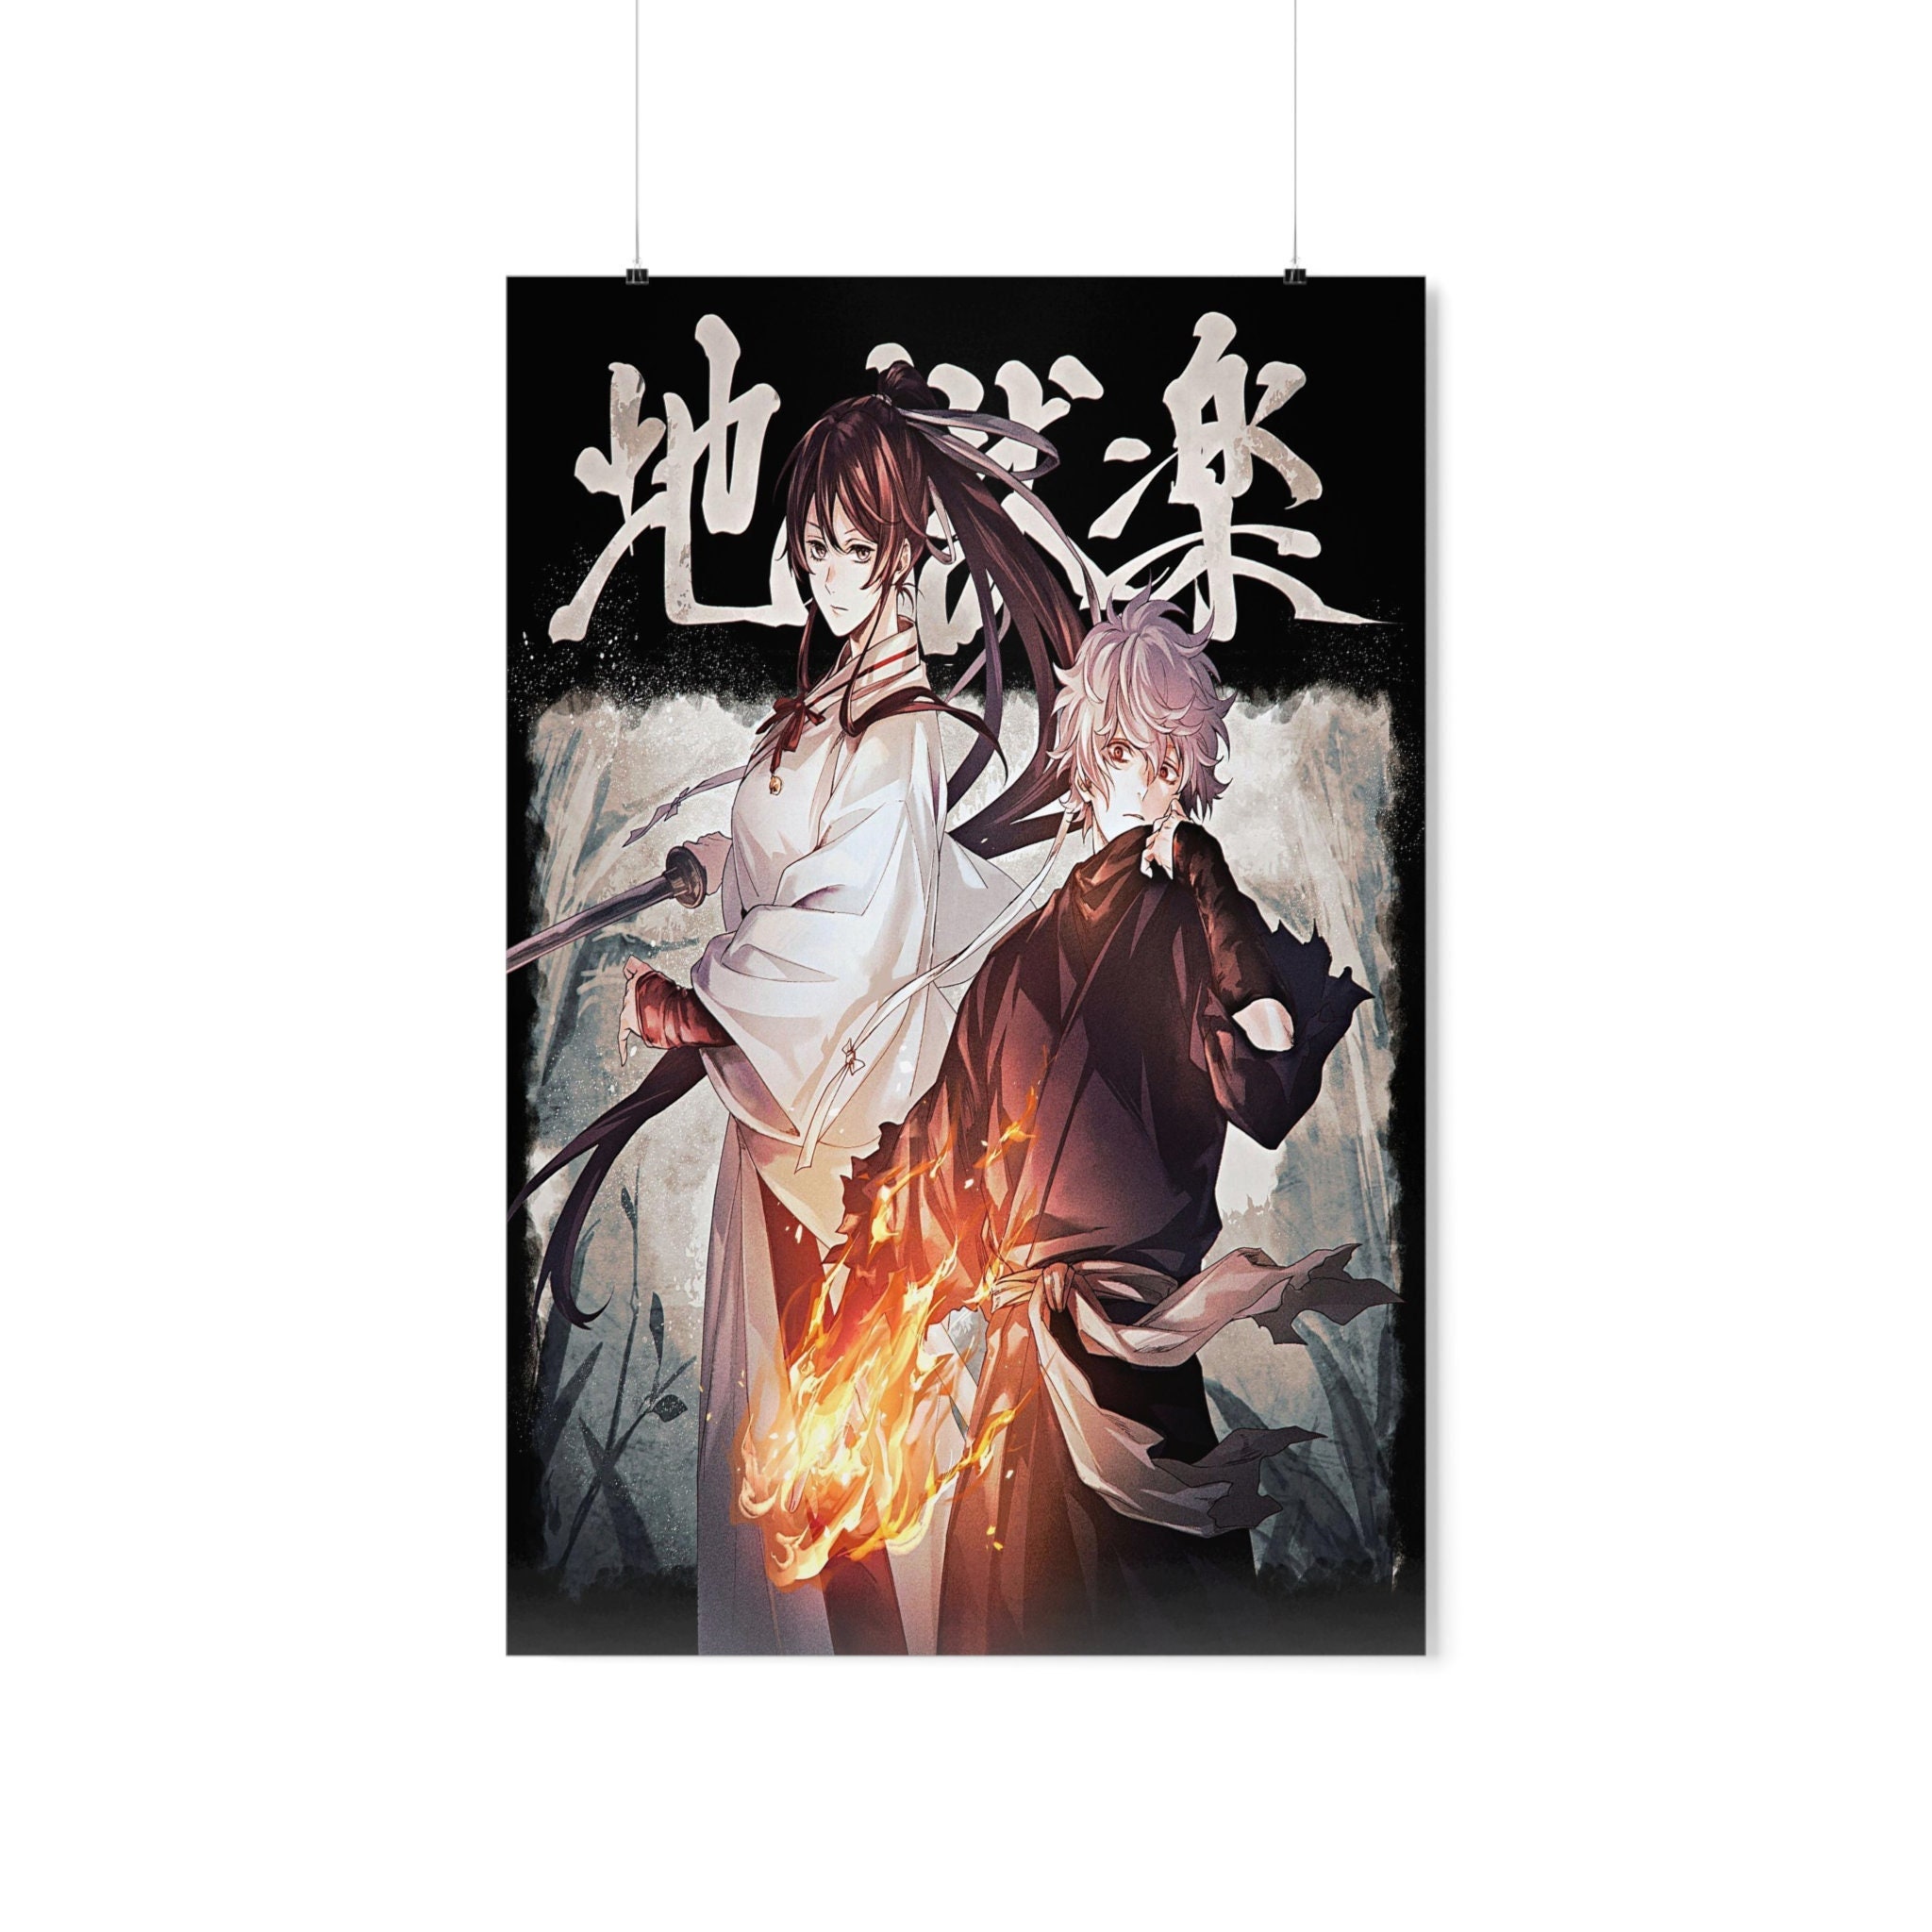  XIANNA Hell's Paradise Jigokuraku Anime Poster (15) Room  Aesthetic Poster Print Art Wall Painting Canvas Posters Gifts Modern  Bedroom Decor 12x18inch(30x45cm): Posters & Prints